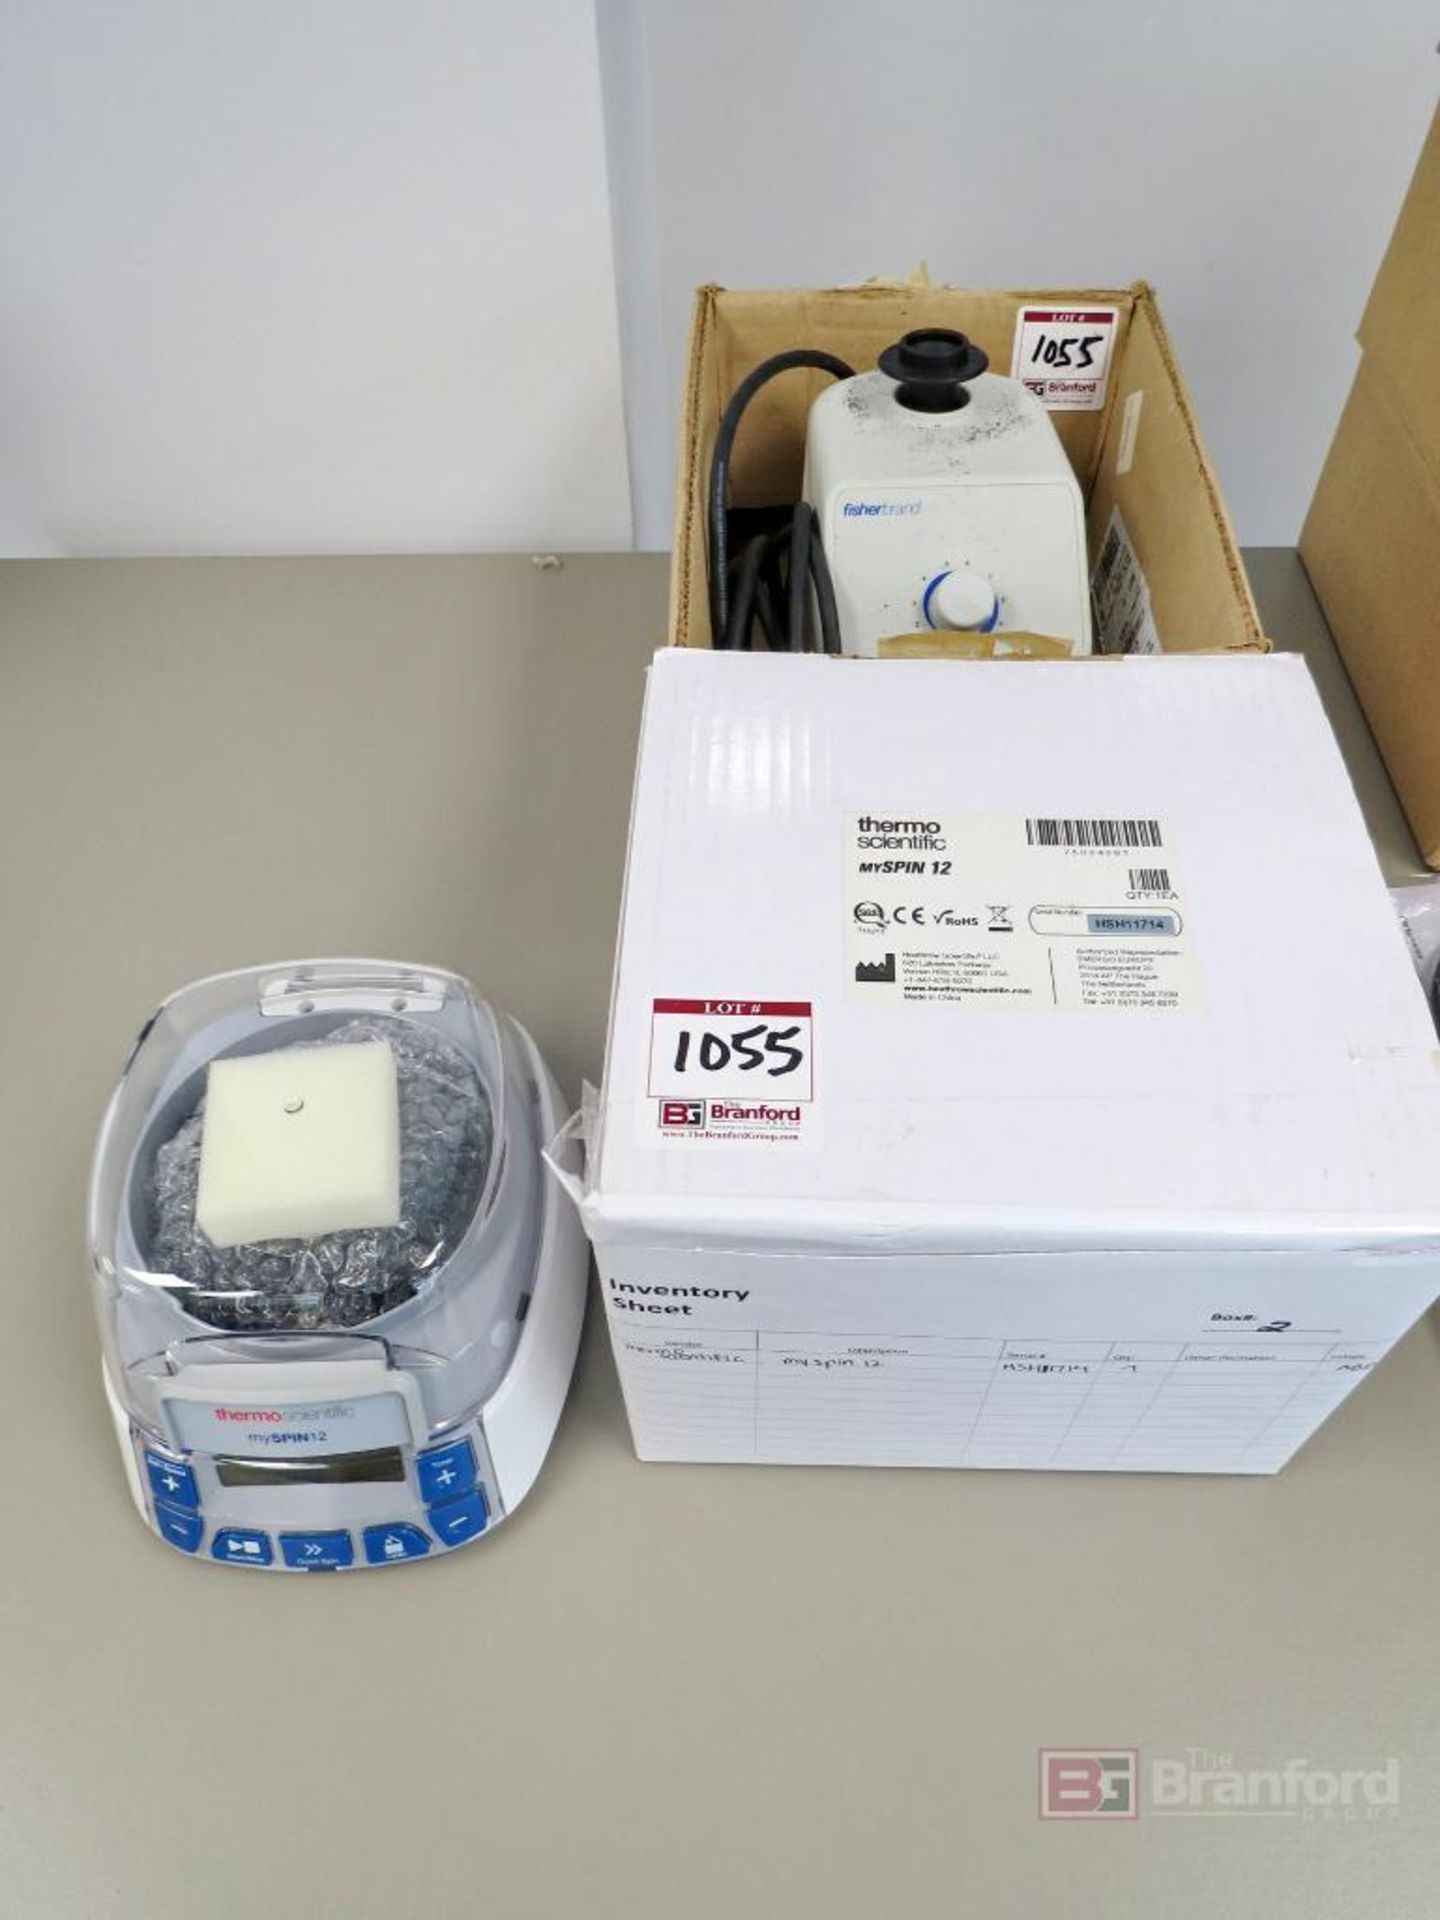 Lot of (1) Thermo MySpin 12 Centrifuge - New in Box